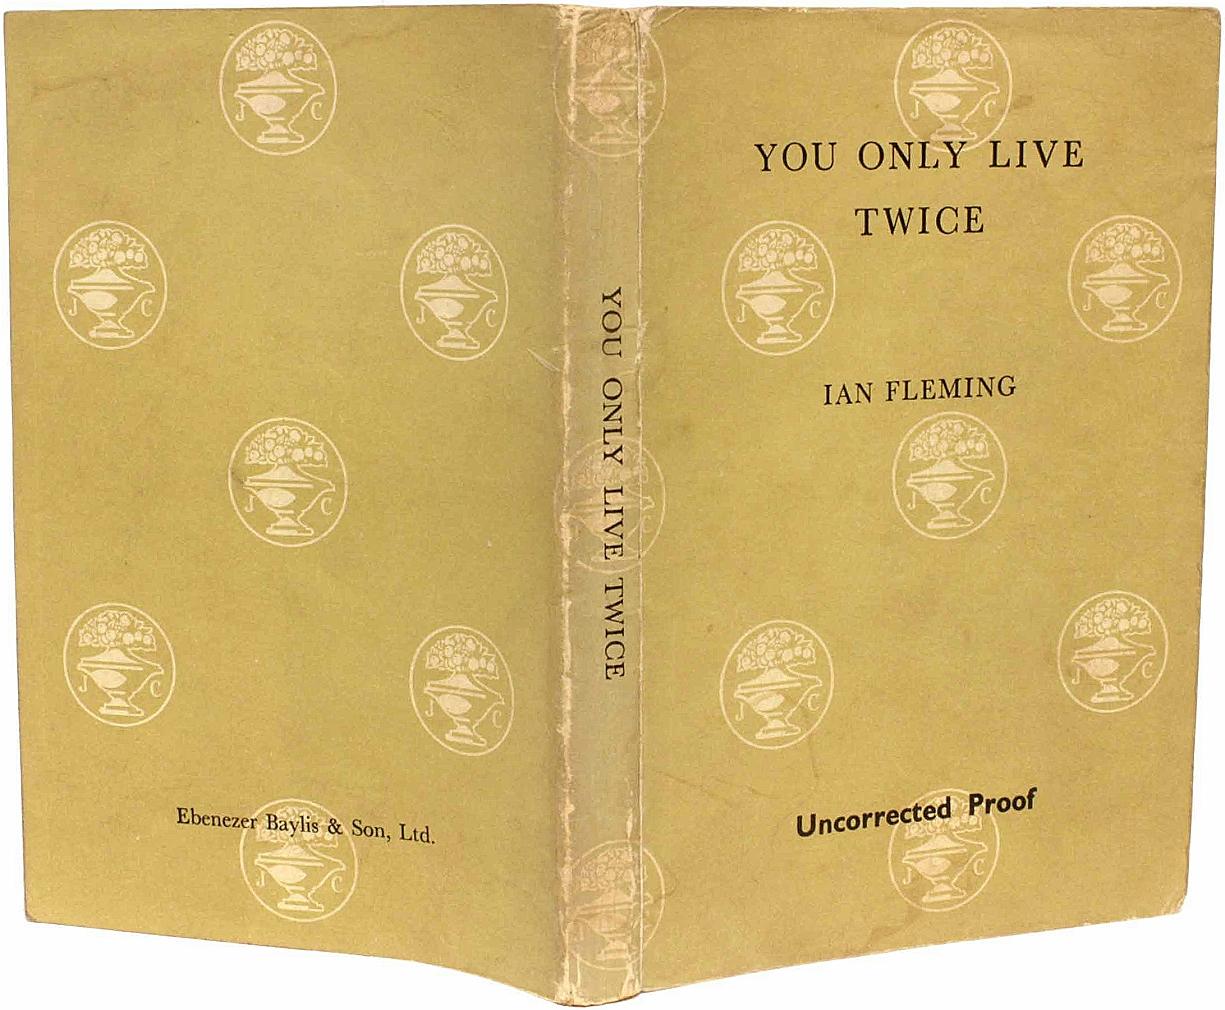 Author: FLEMING, Ian. 

Title: You Only Live Twice - UNCORRECTED PROOF.

Publisher: London: Jonathan Cape, 1964.

FIRST EDITION, FIRST PRINTING, UNCORRECTED PROOF. 1 vol., perhaps limited to approximately 500 copies, neat ownership signature